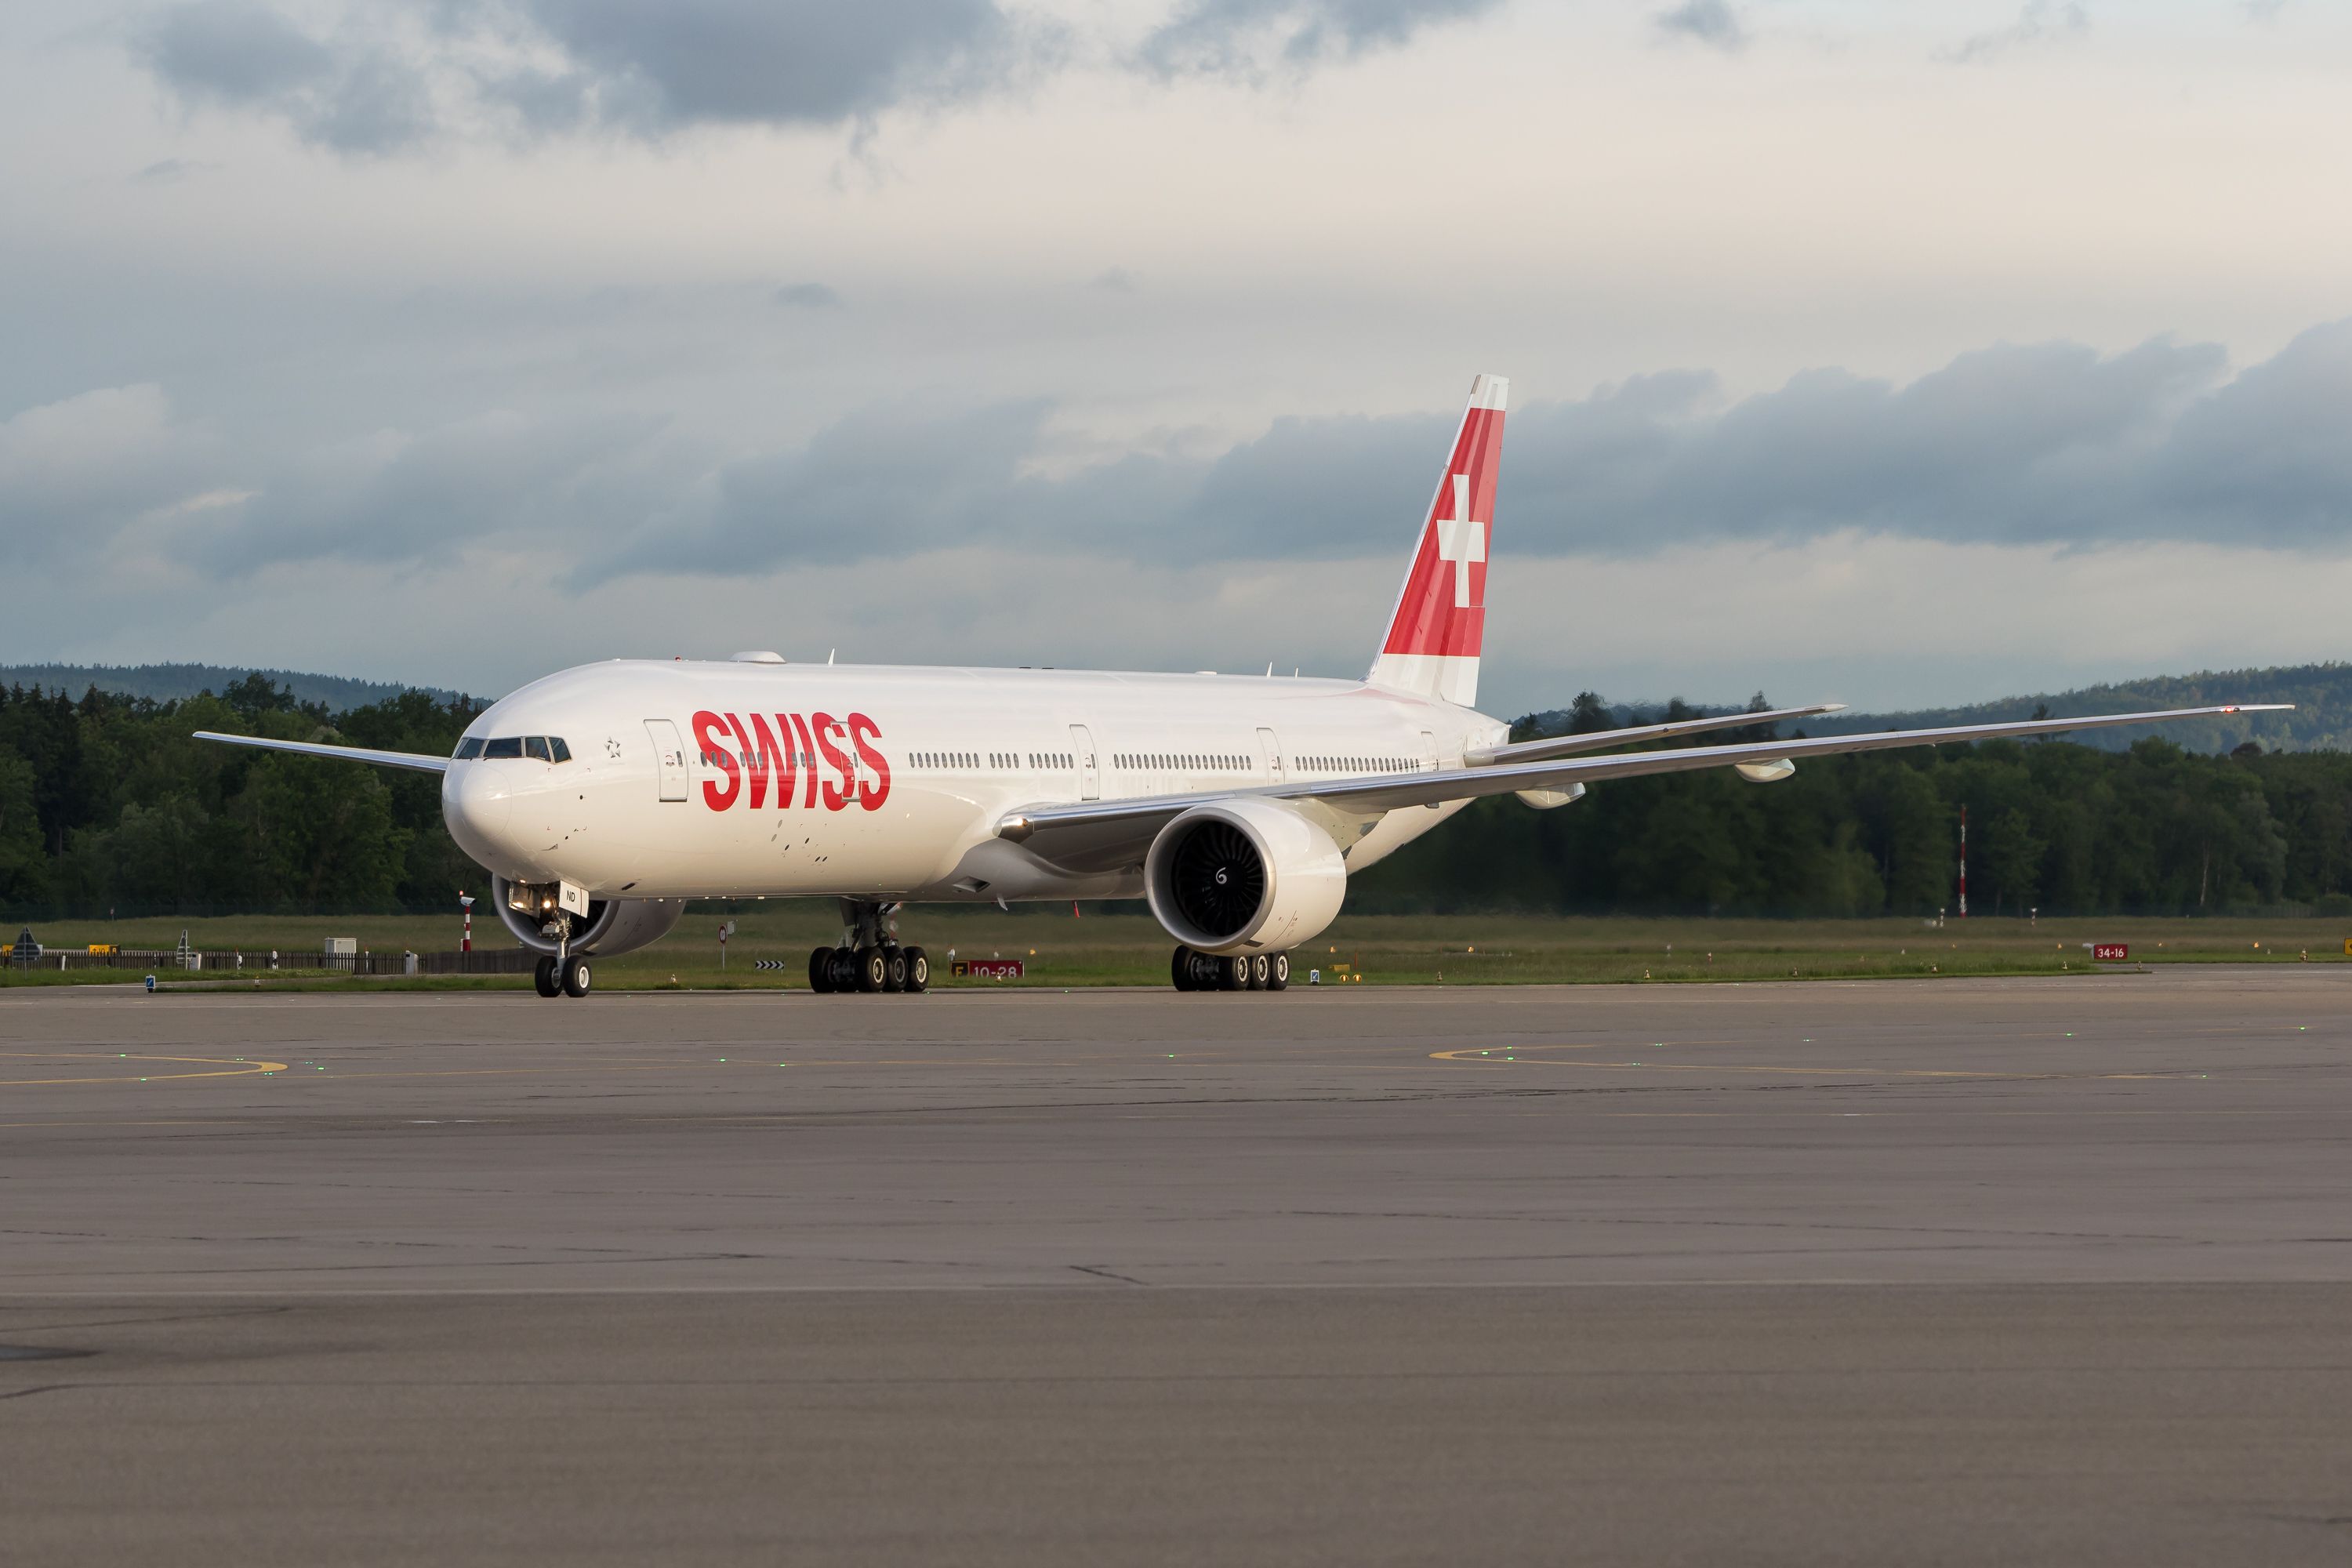 A SWISS Boeing 777-300ER on an airport apron.